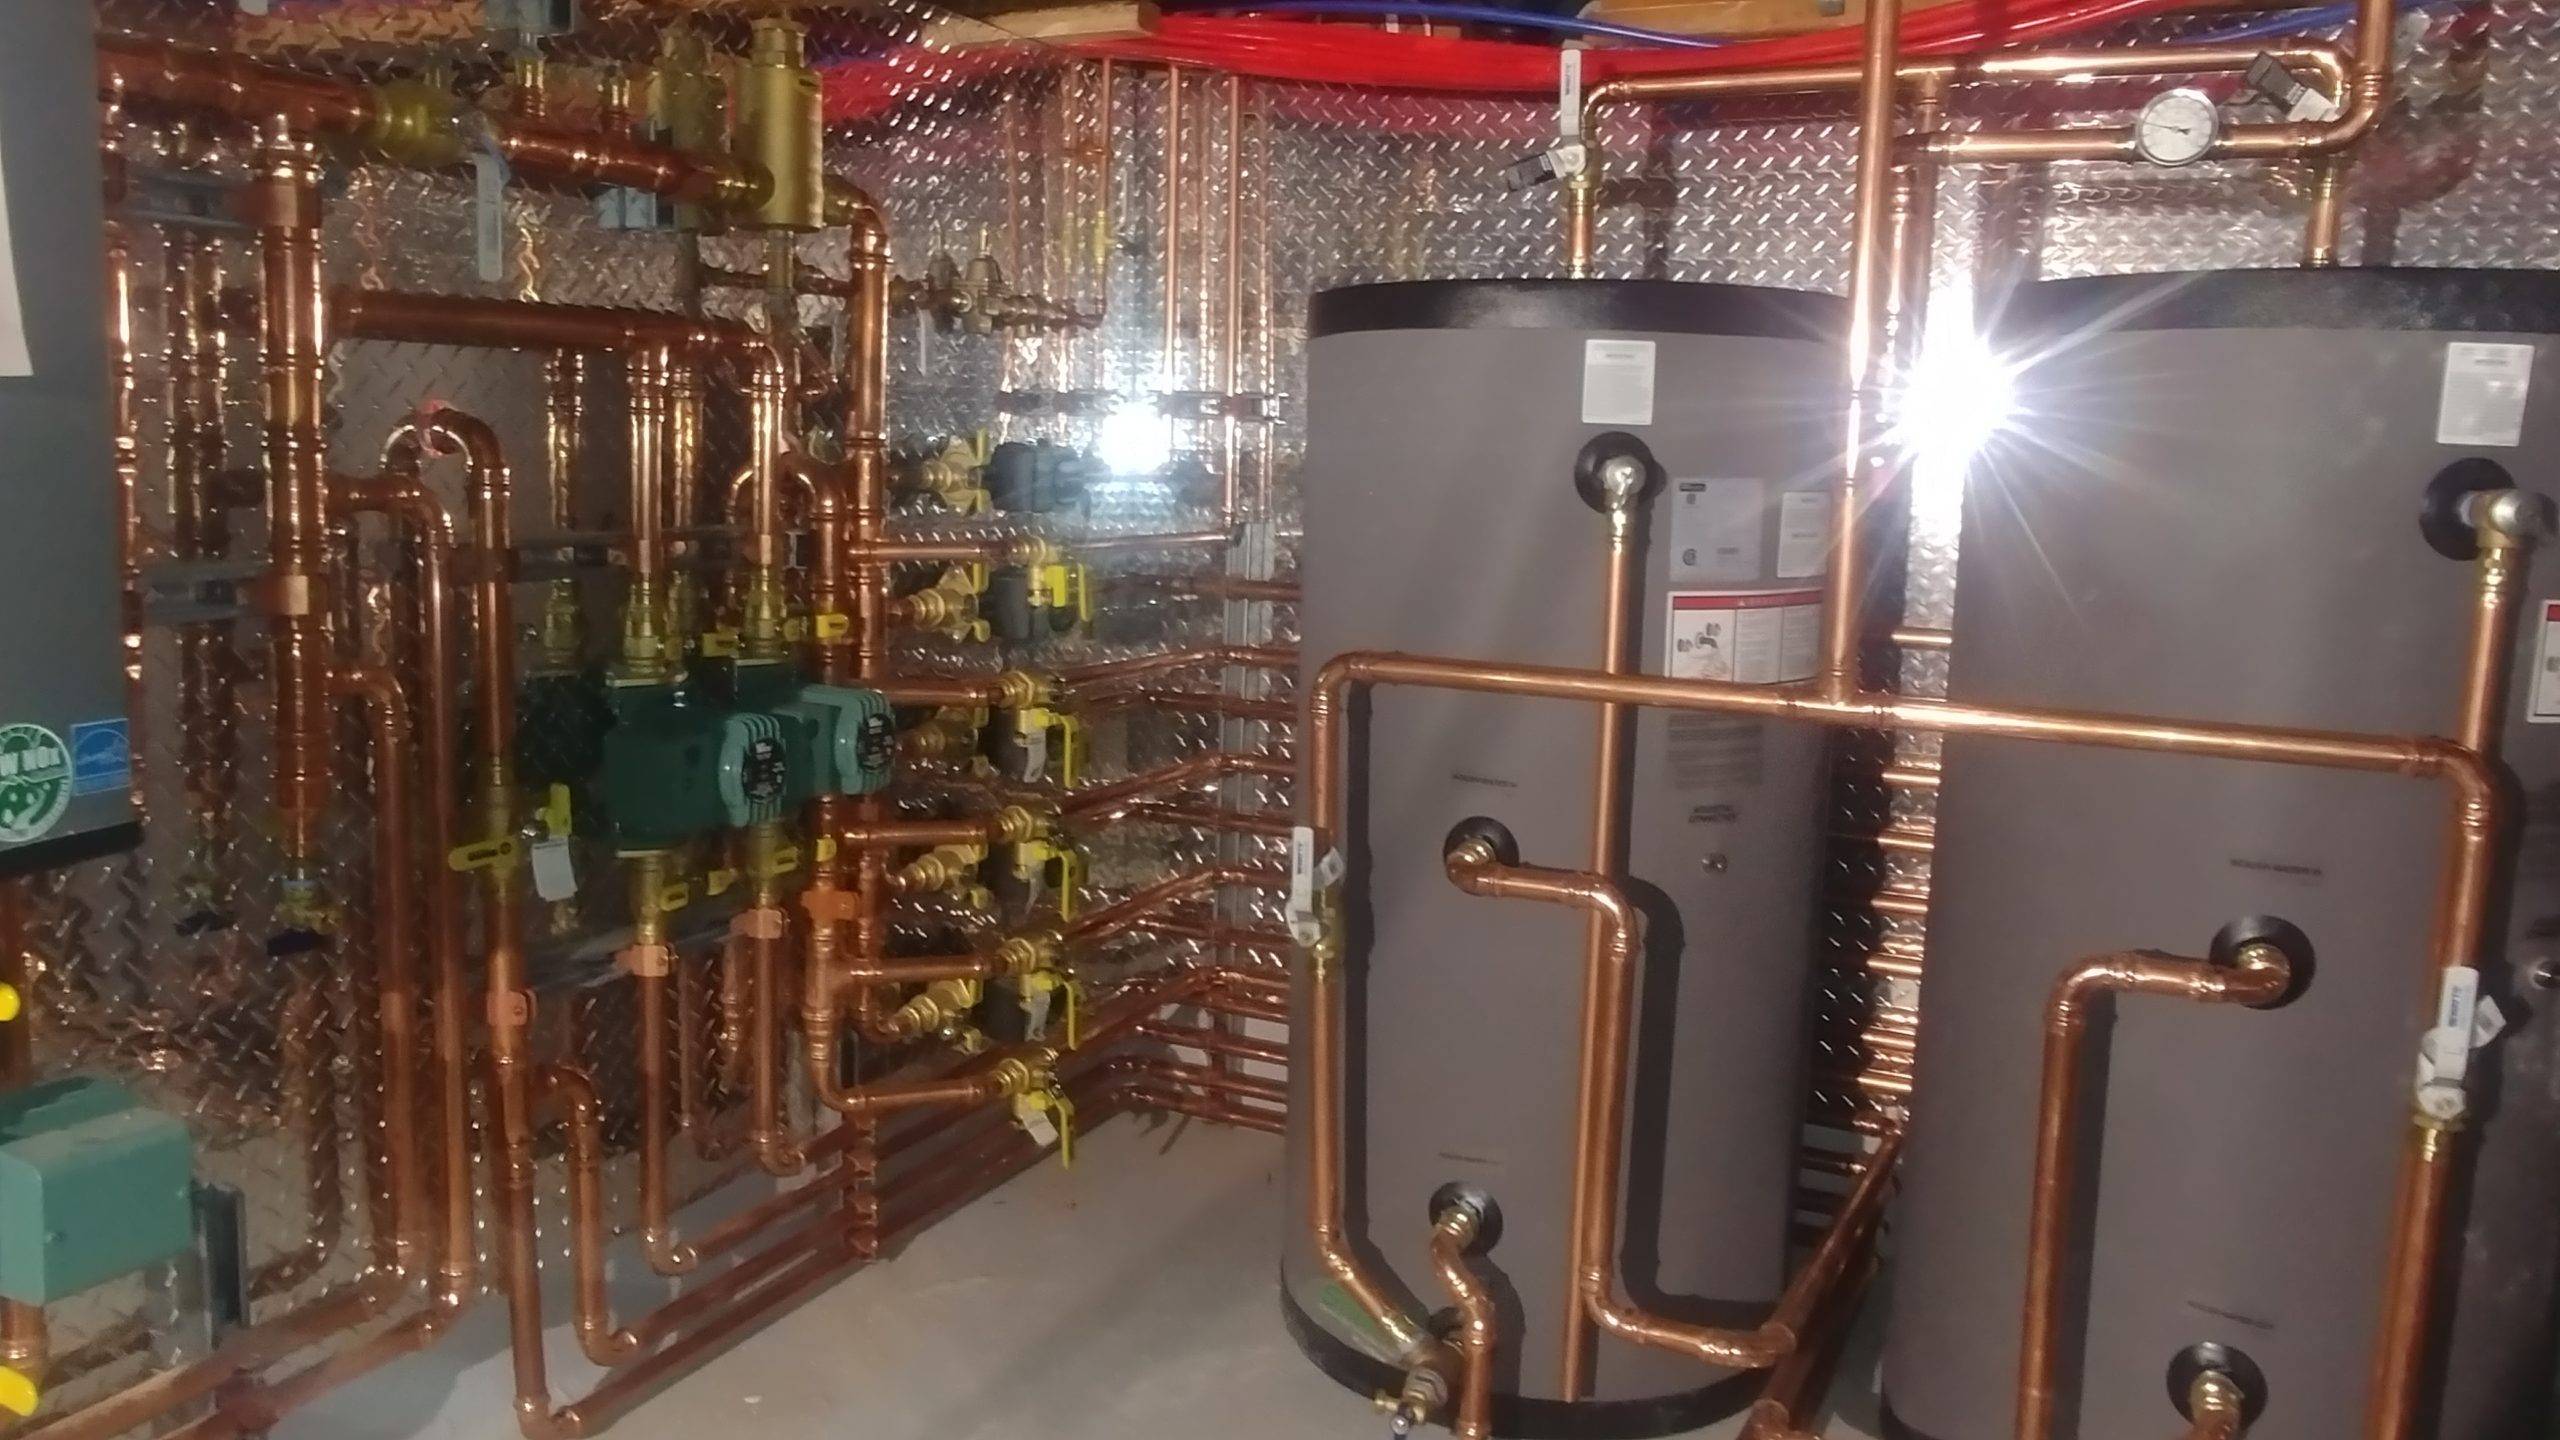 Water Heaters & Copper Pipes